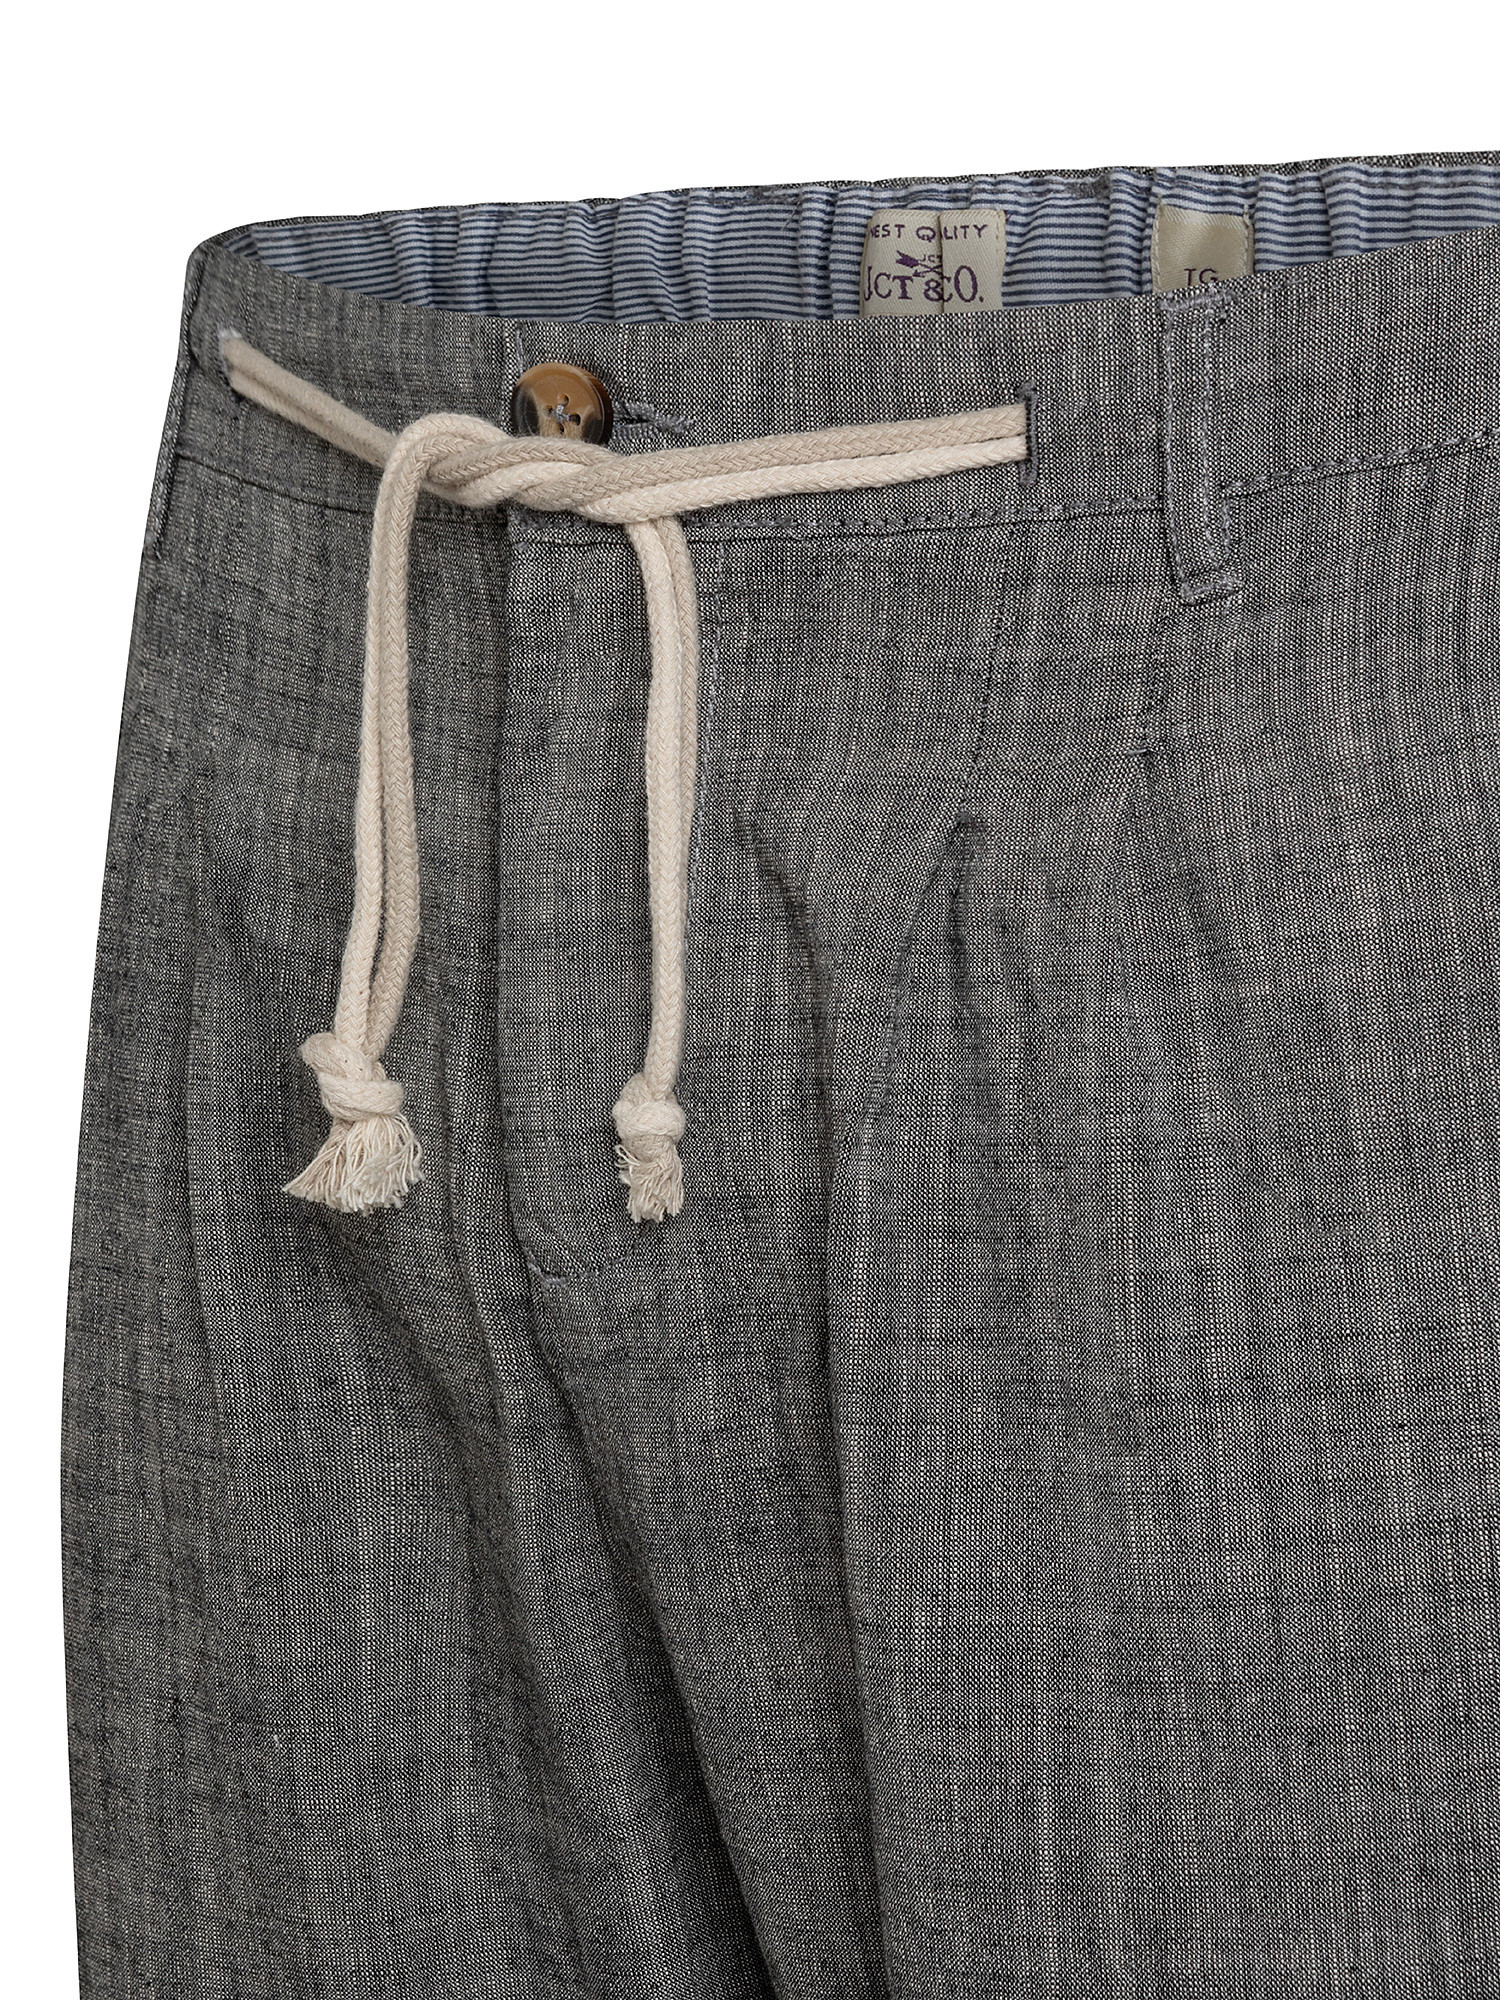 Pantalone con coulisse, Grigio, large image number 2